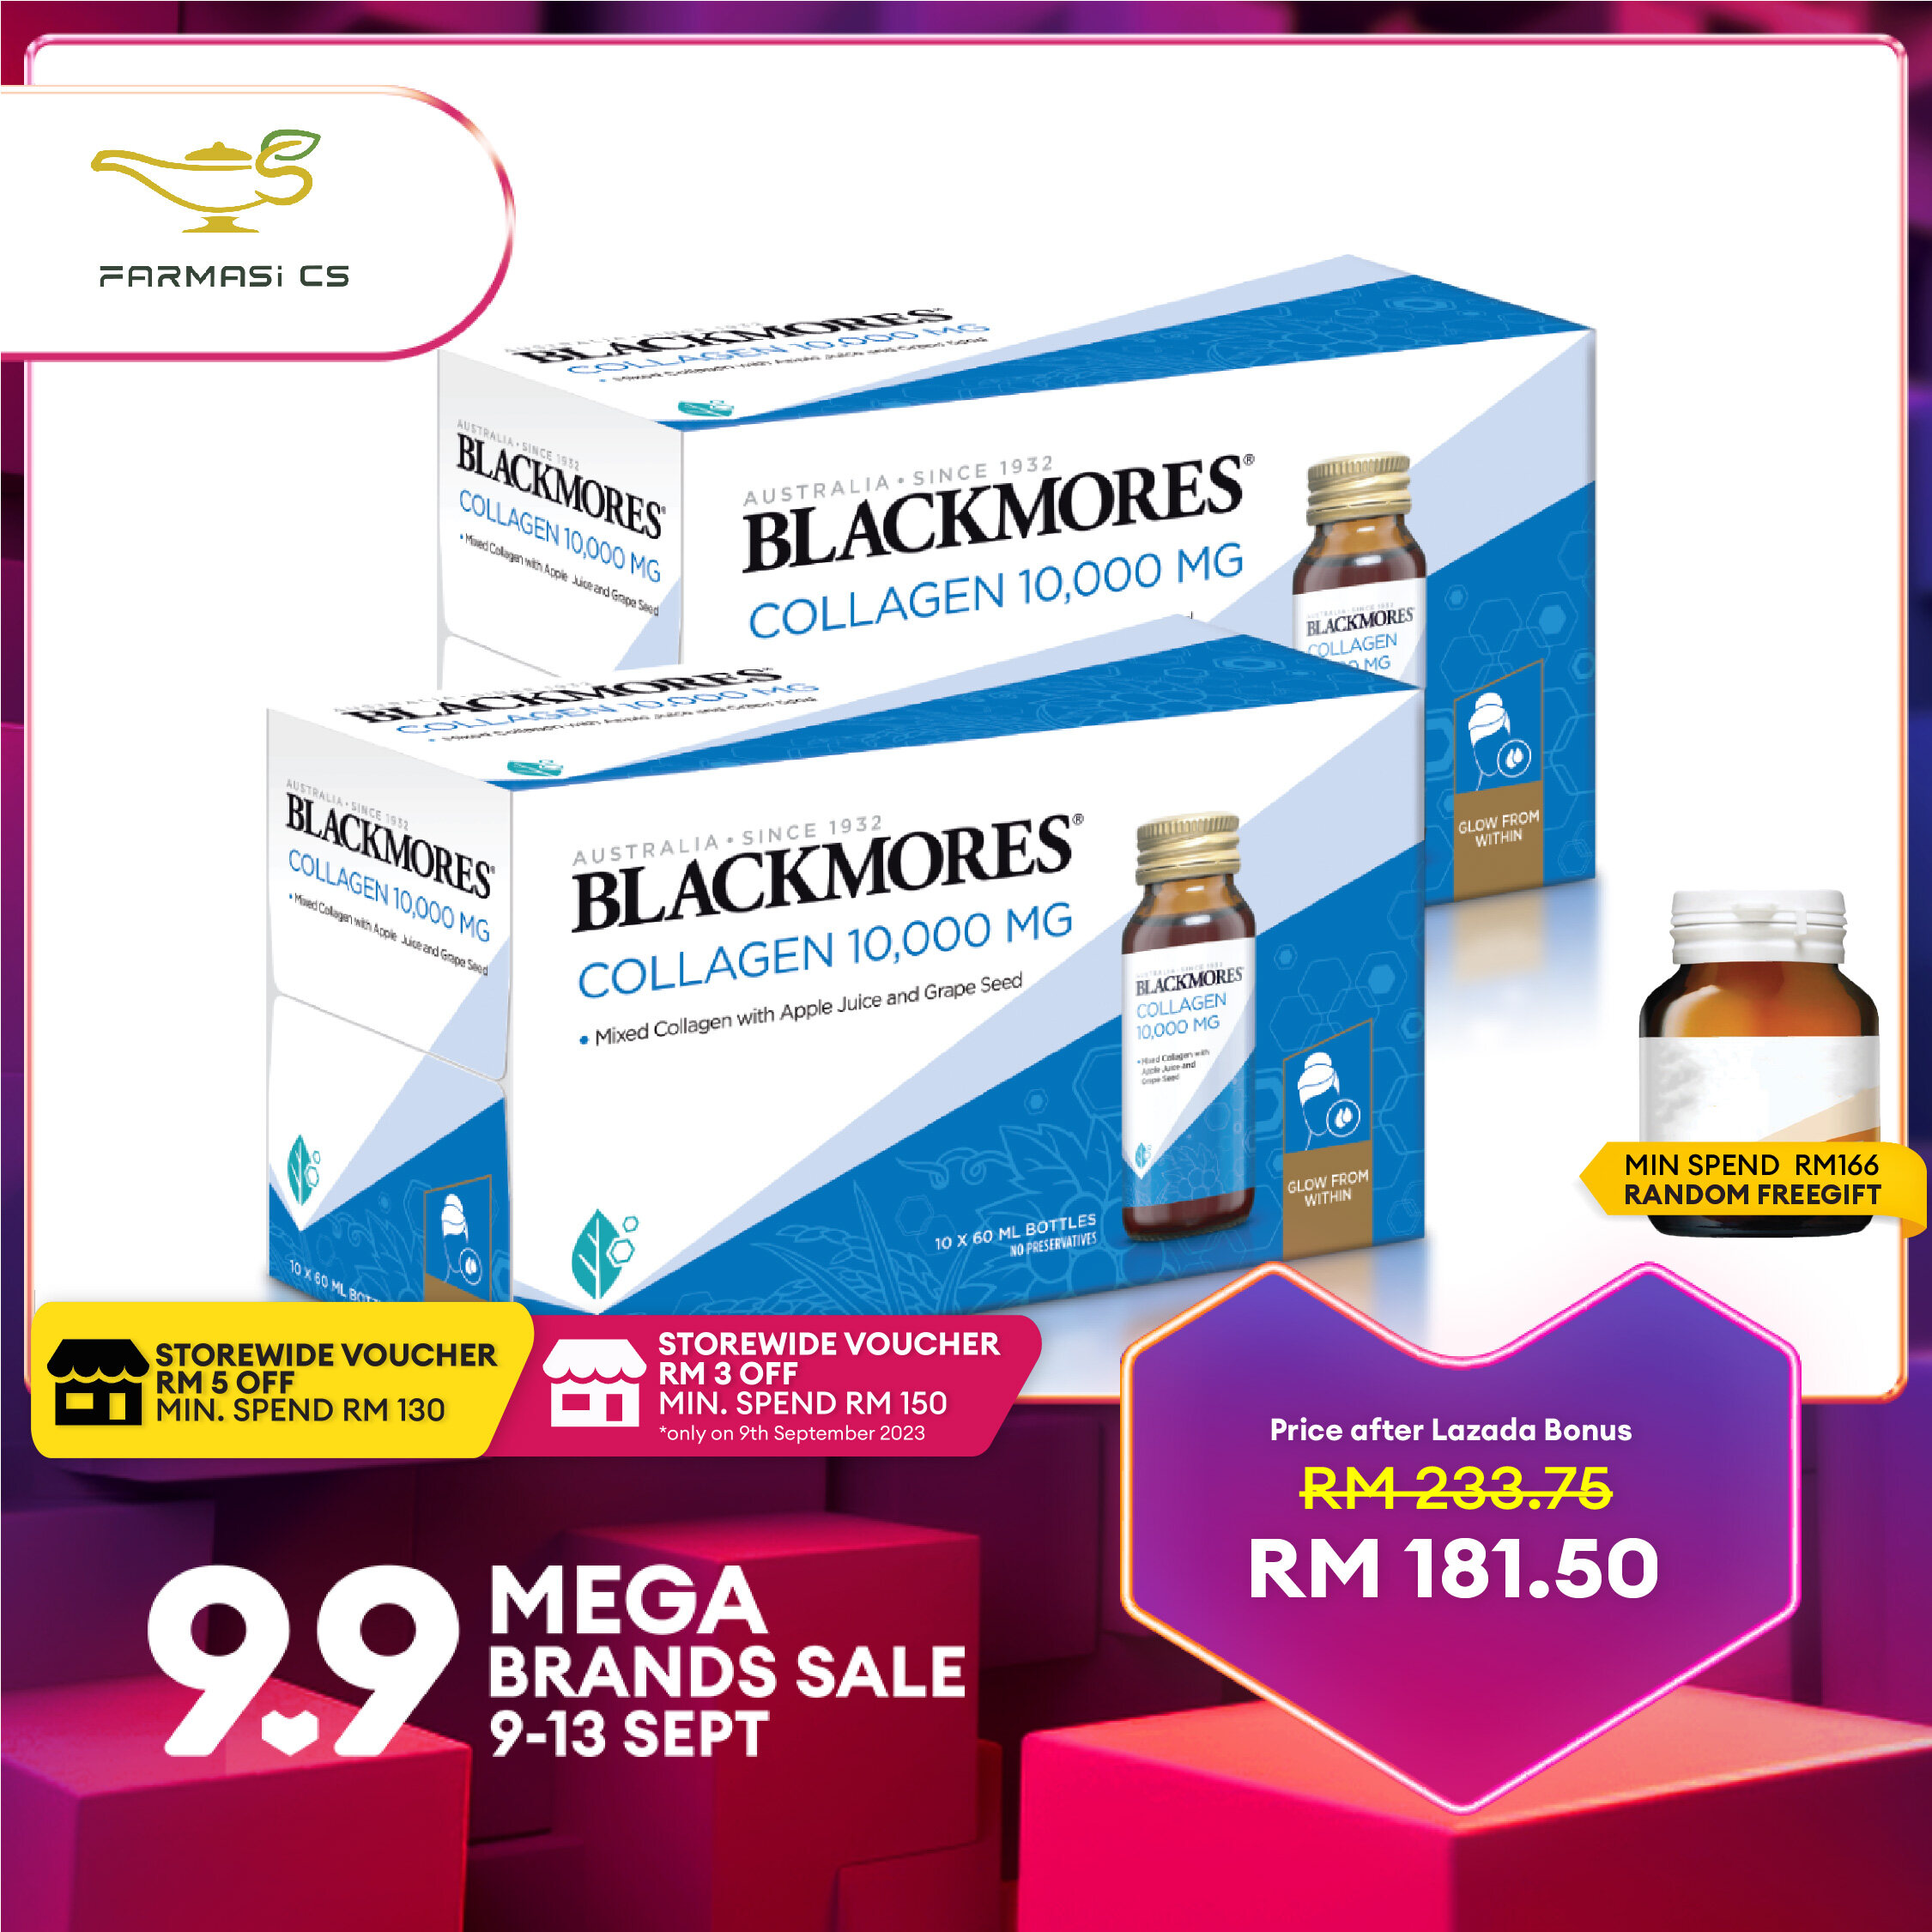 BLACKMORES Collagen 10000mg High Strength 60mL 20+4 bottles (TWIN) EXP:01/2023 [ Builds protects and lightens skin Grape seed Vitamin E ]